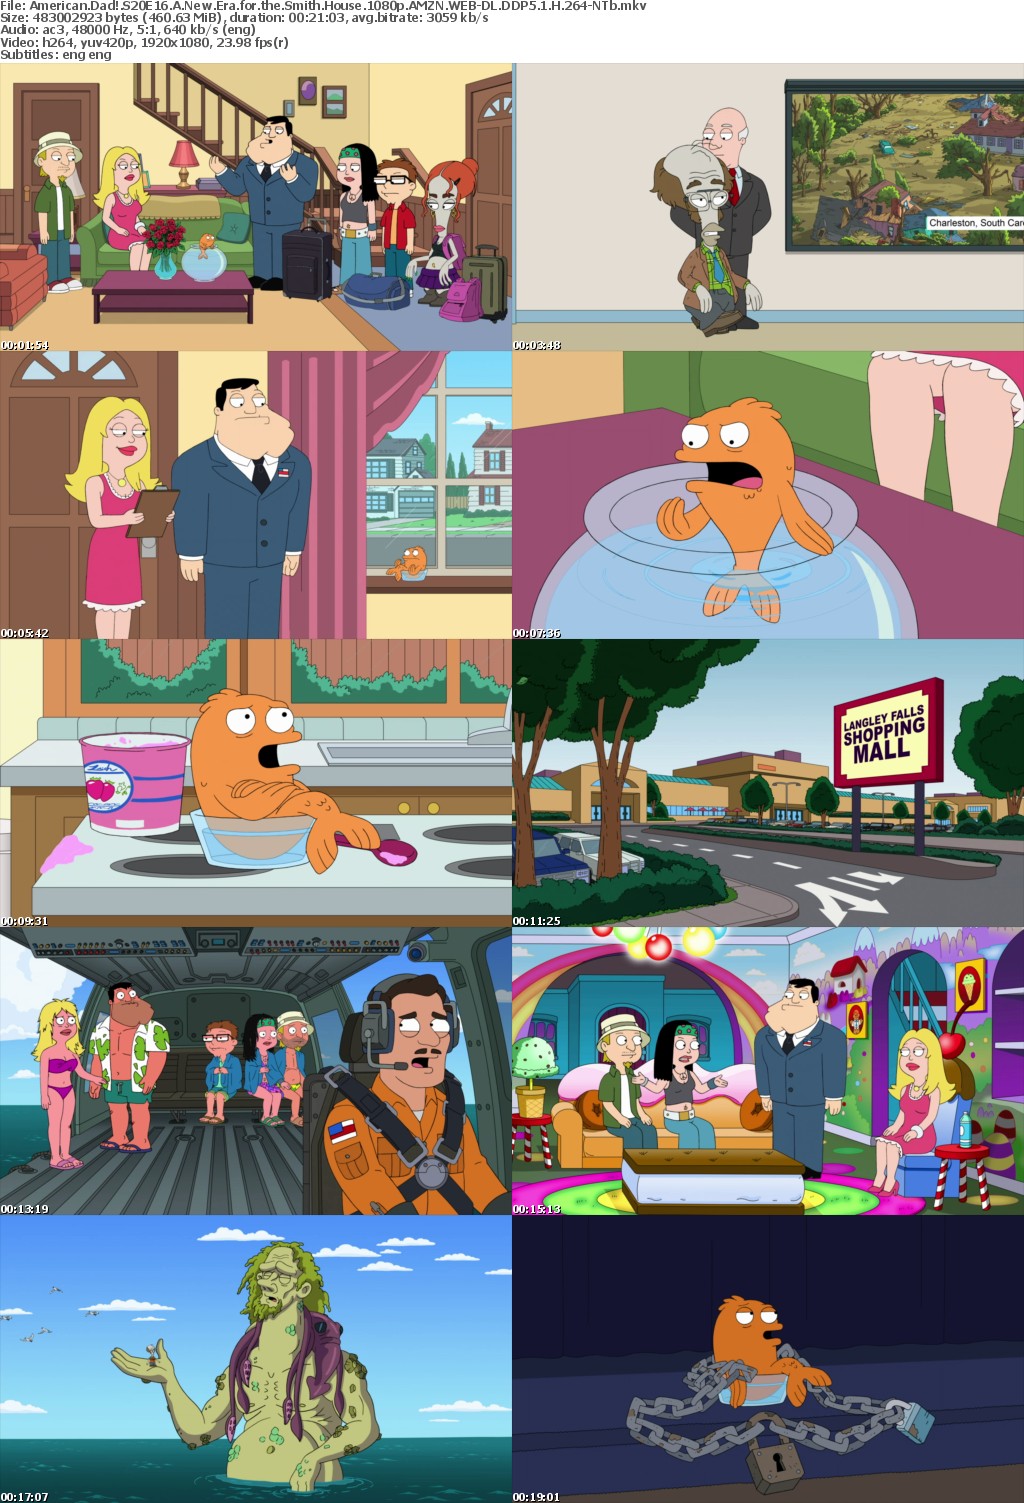 American Dad! S20E16 A New Era for the Smith House 1080p AMZN WEB-DL DDP5 1 H 264-NTb